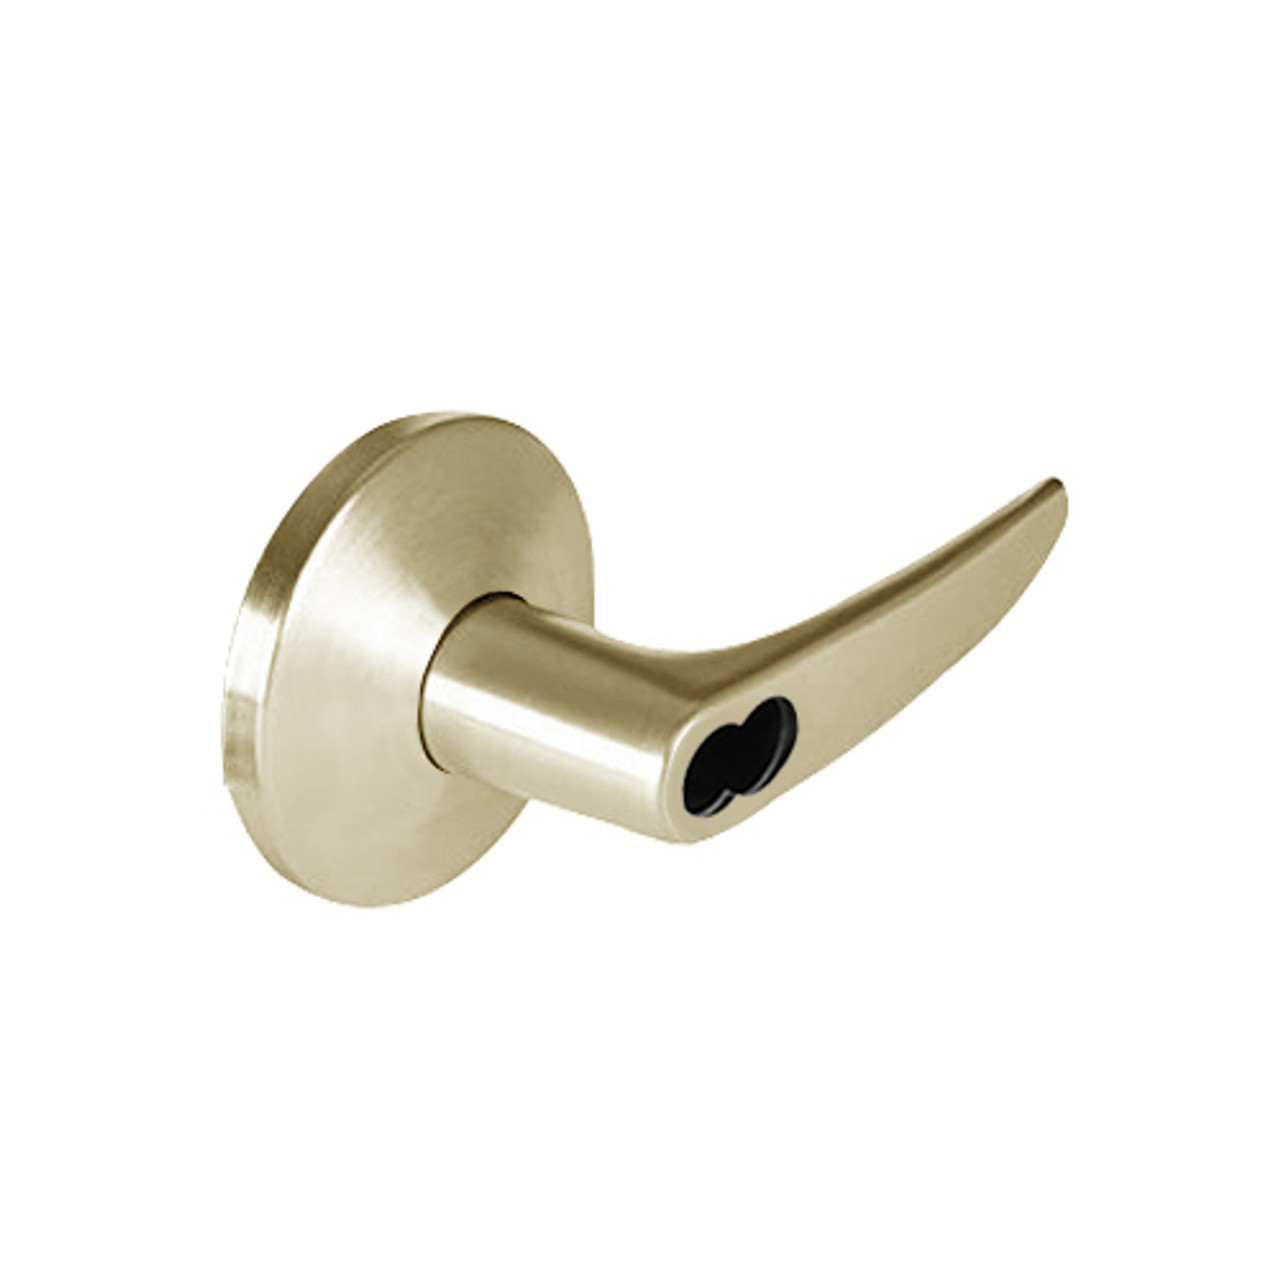 9K37RD16LSTK606 Best 9K Series Special Function Cylindrical Lever Locks with Curved without Return Lever Design Accept 7 Pin Best Core in Satin Brass